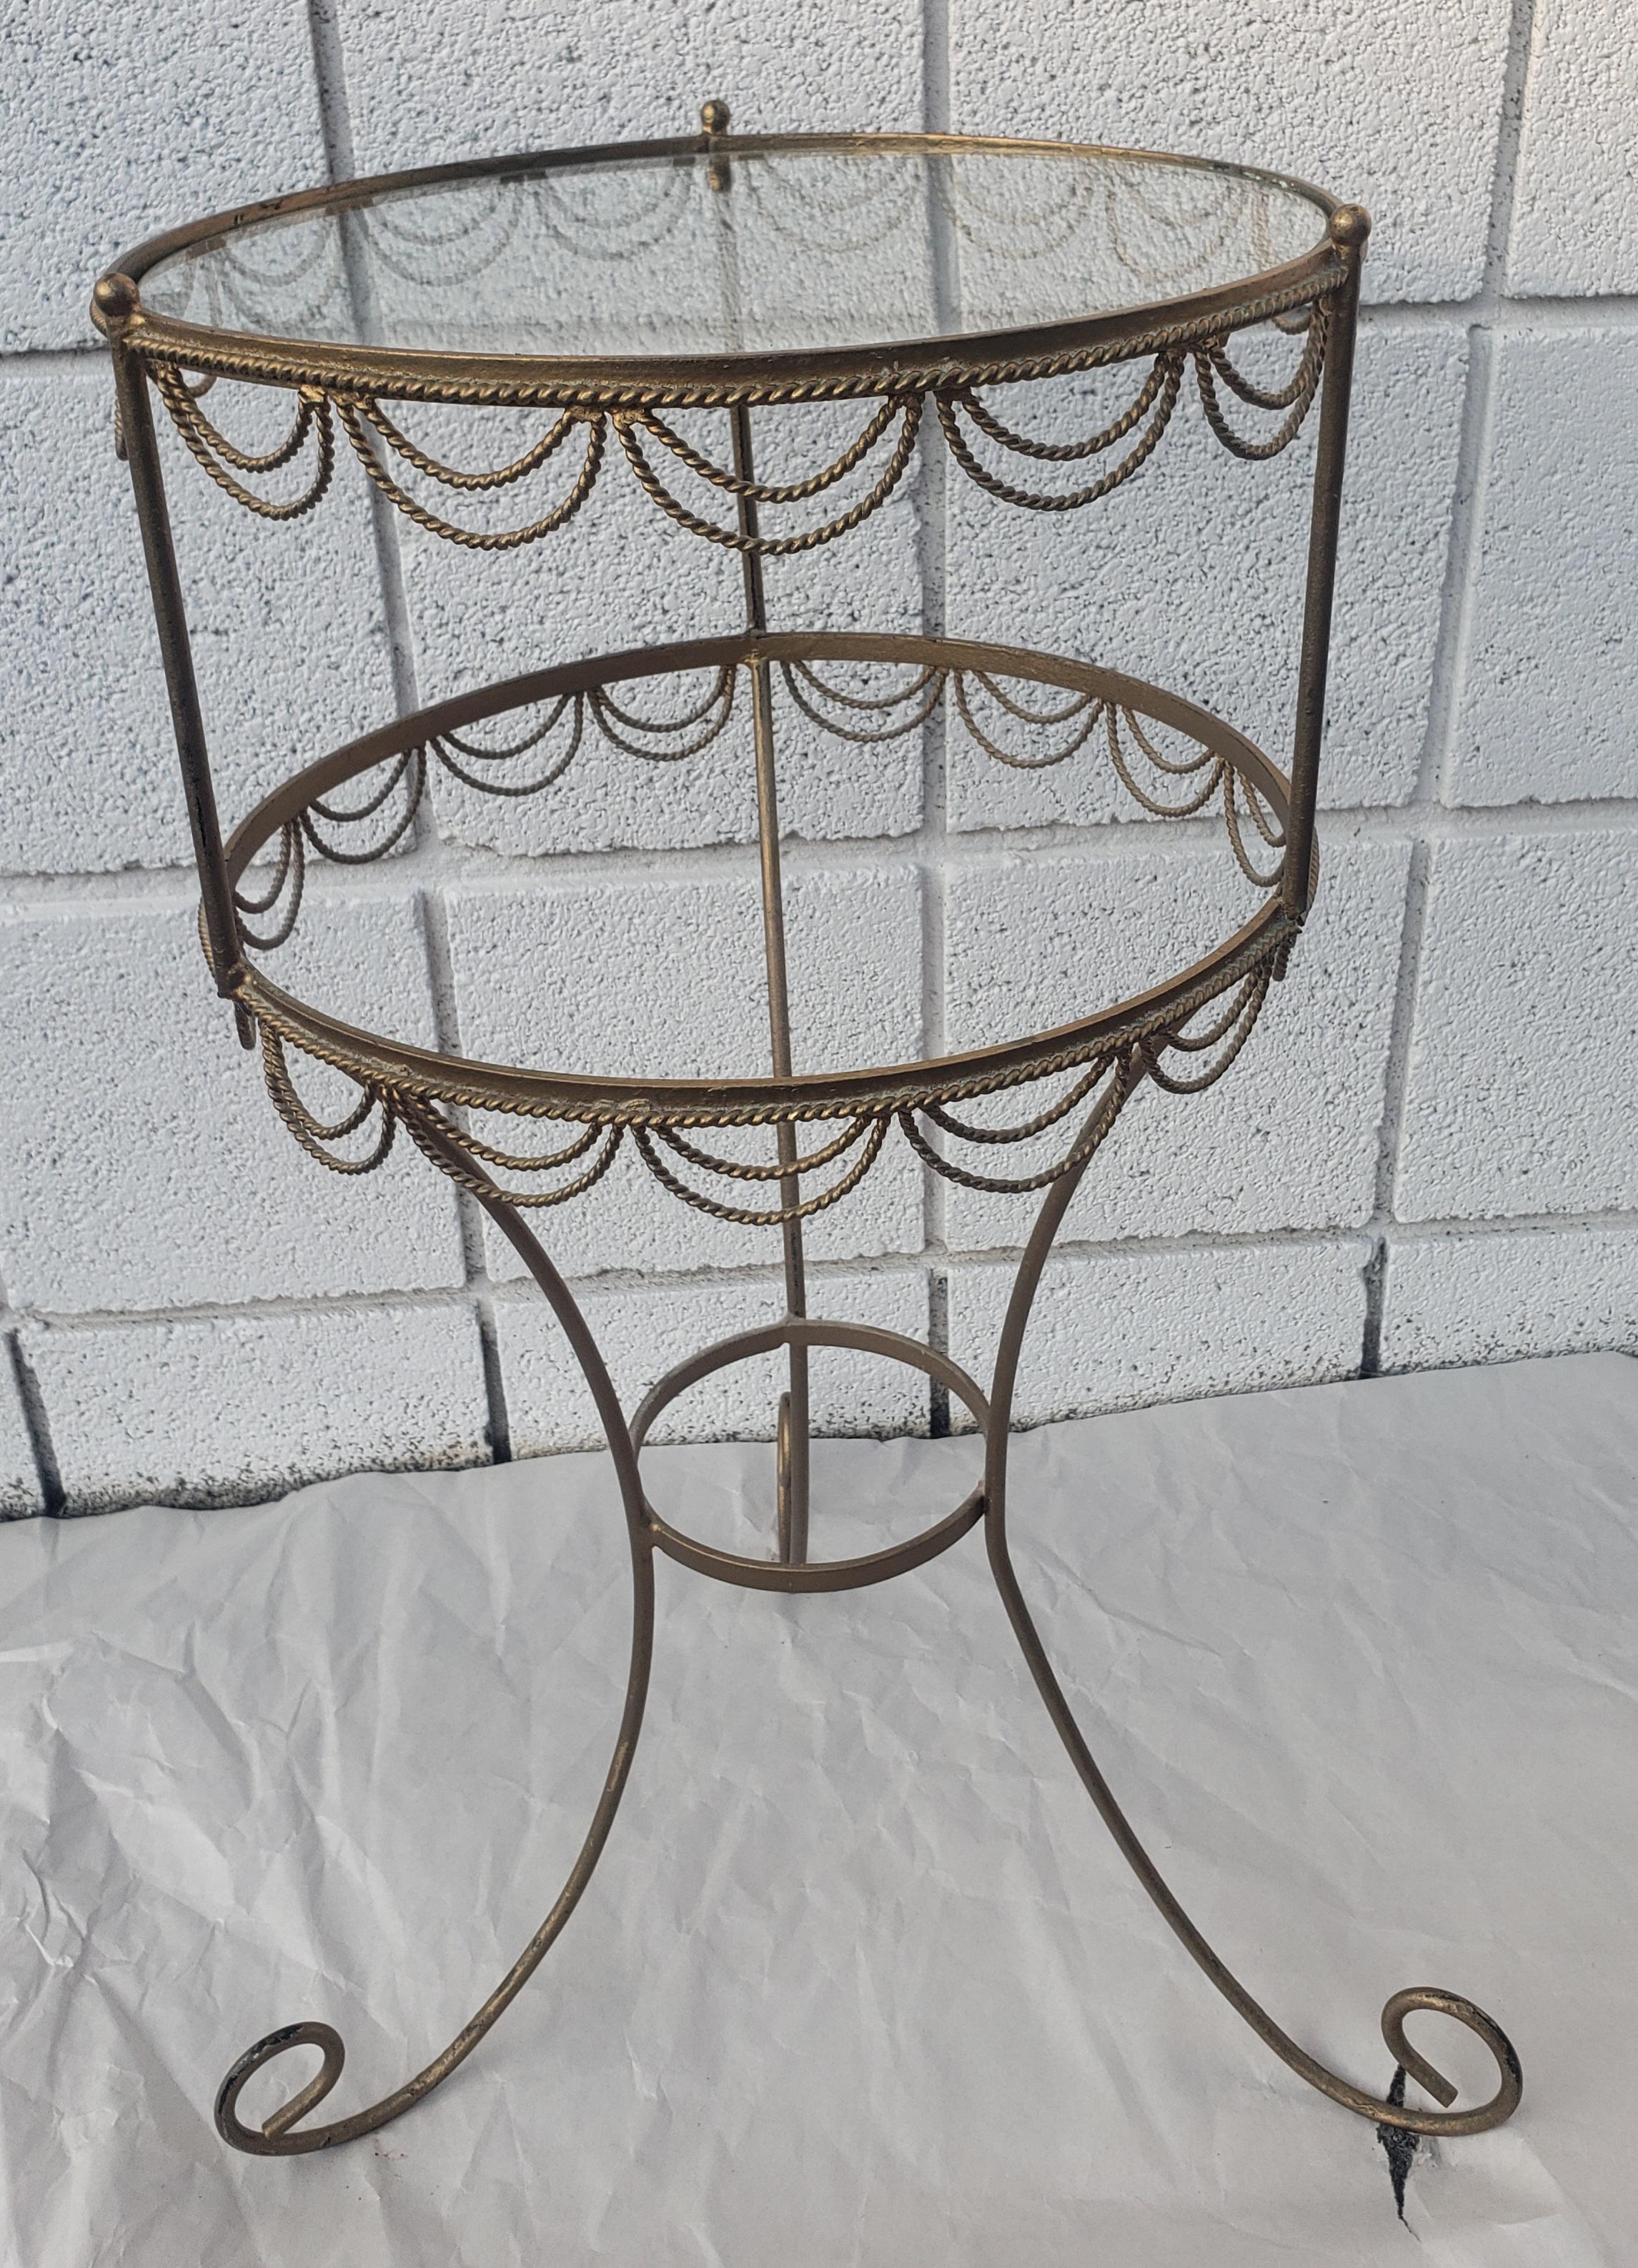 American Hollywood Regency Gilt Metal Ornate and Glass Top Candle Stand Plant Stand For Sale